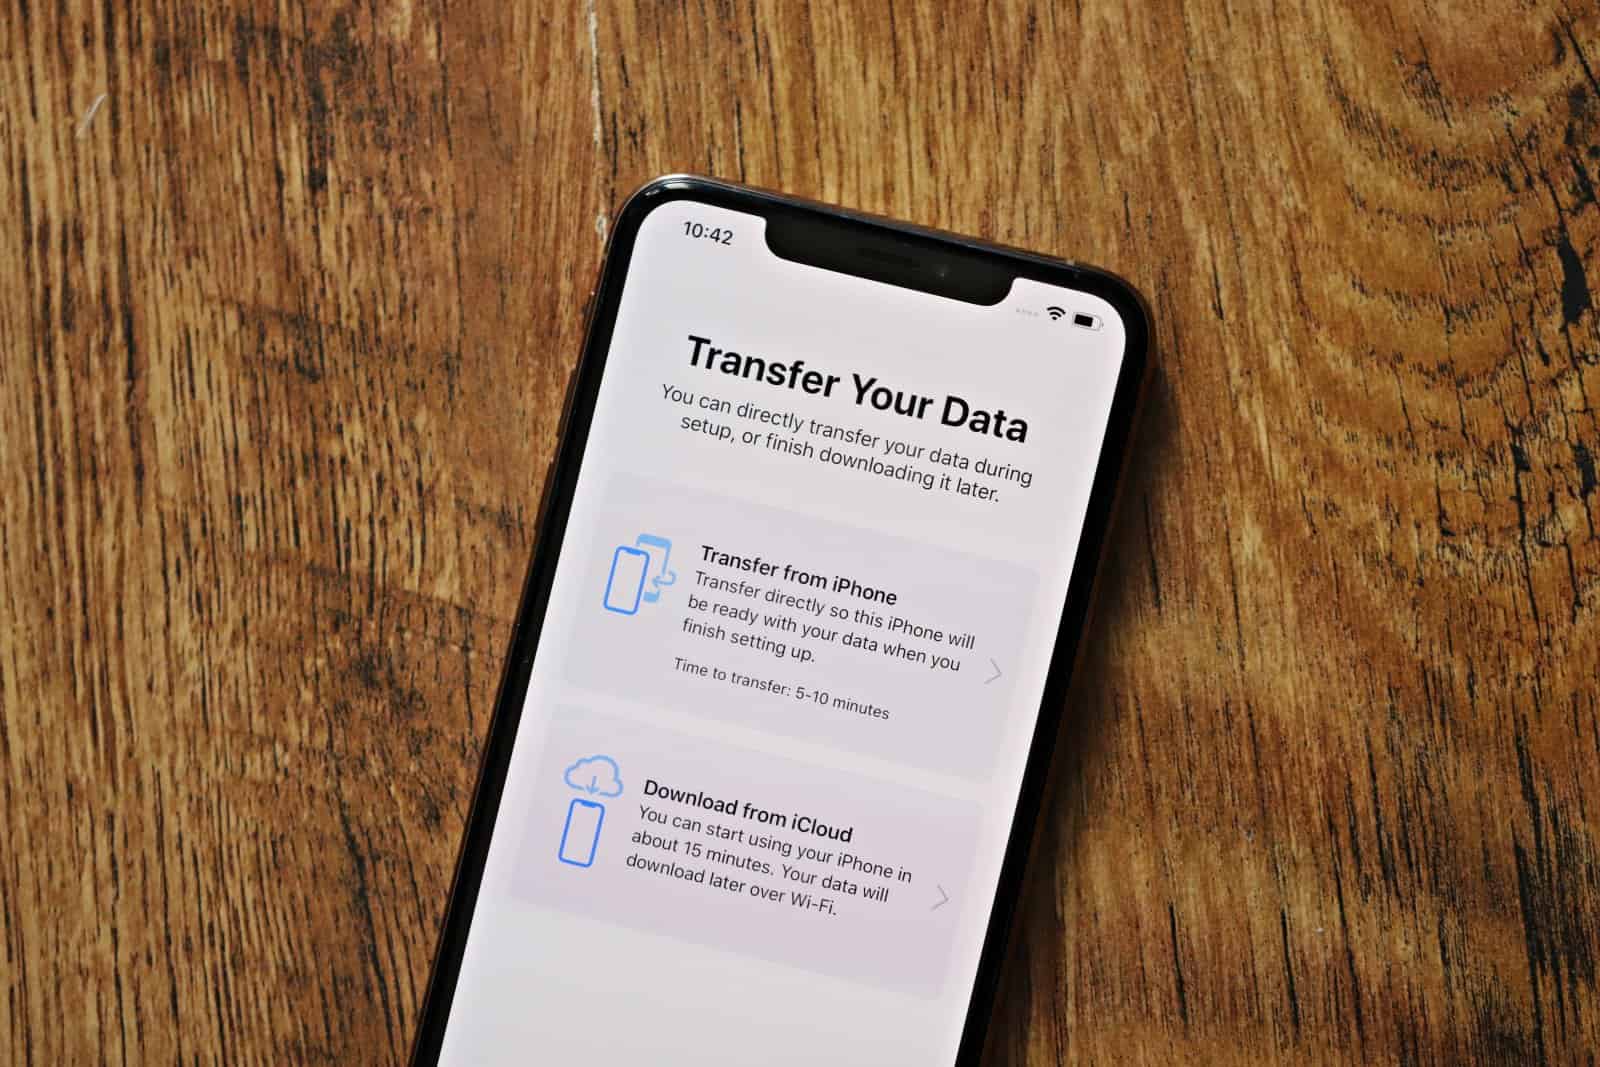 iPhone Transfer Your Data from iPhone directly wireless